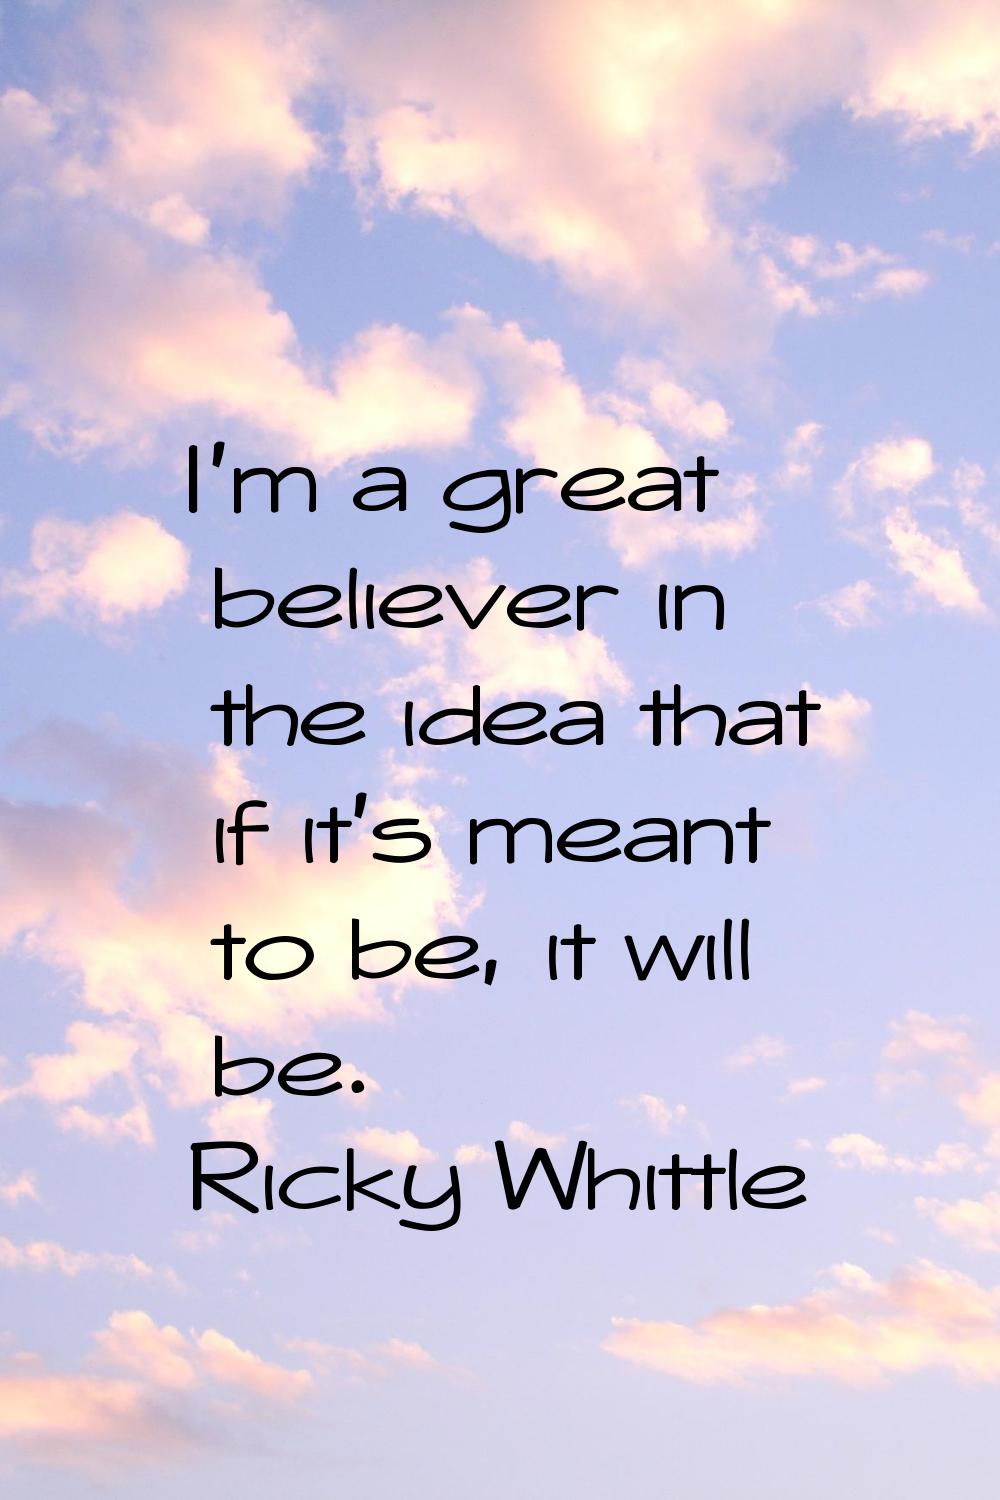 I'm a great believer in the idea that if it's meant to be, it will be.